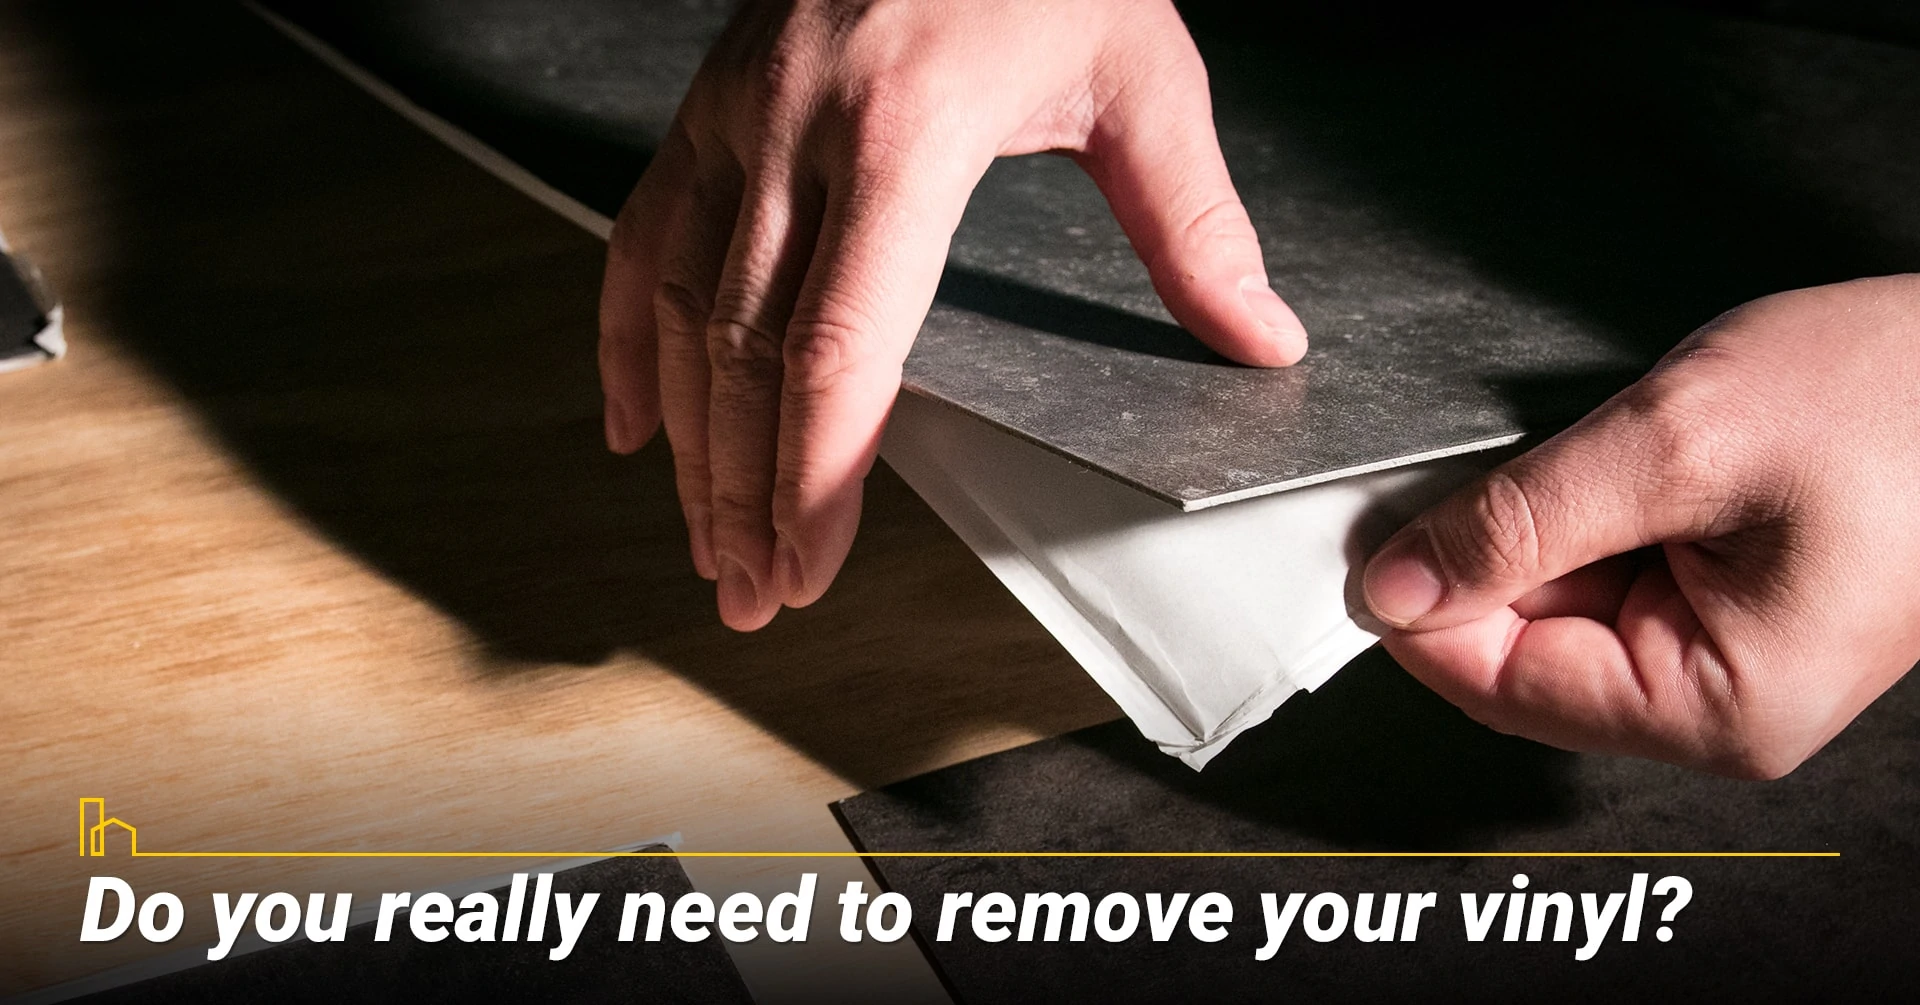 Do you really need to remove your vinyl?